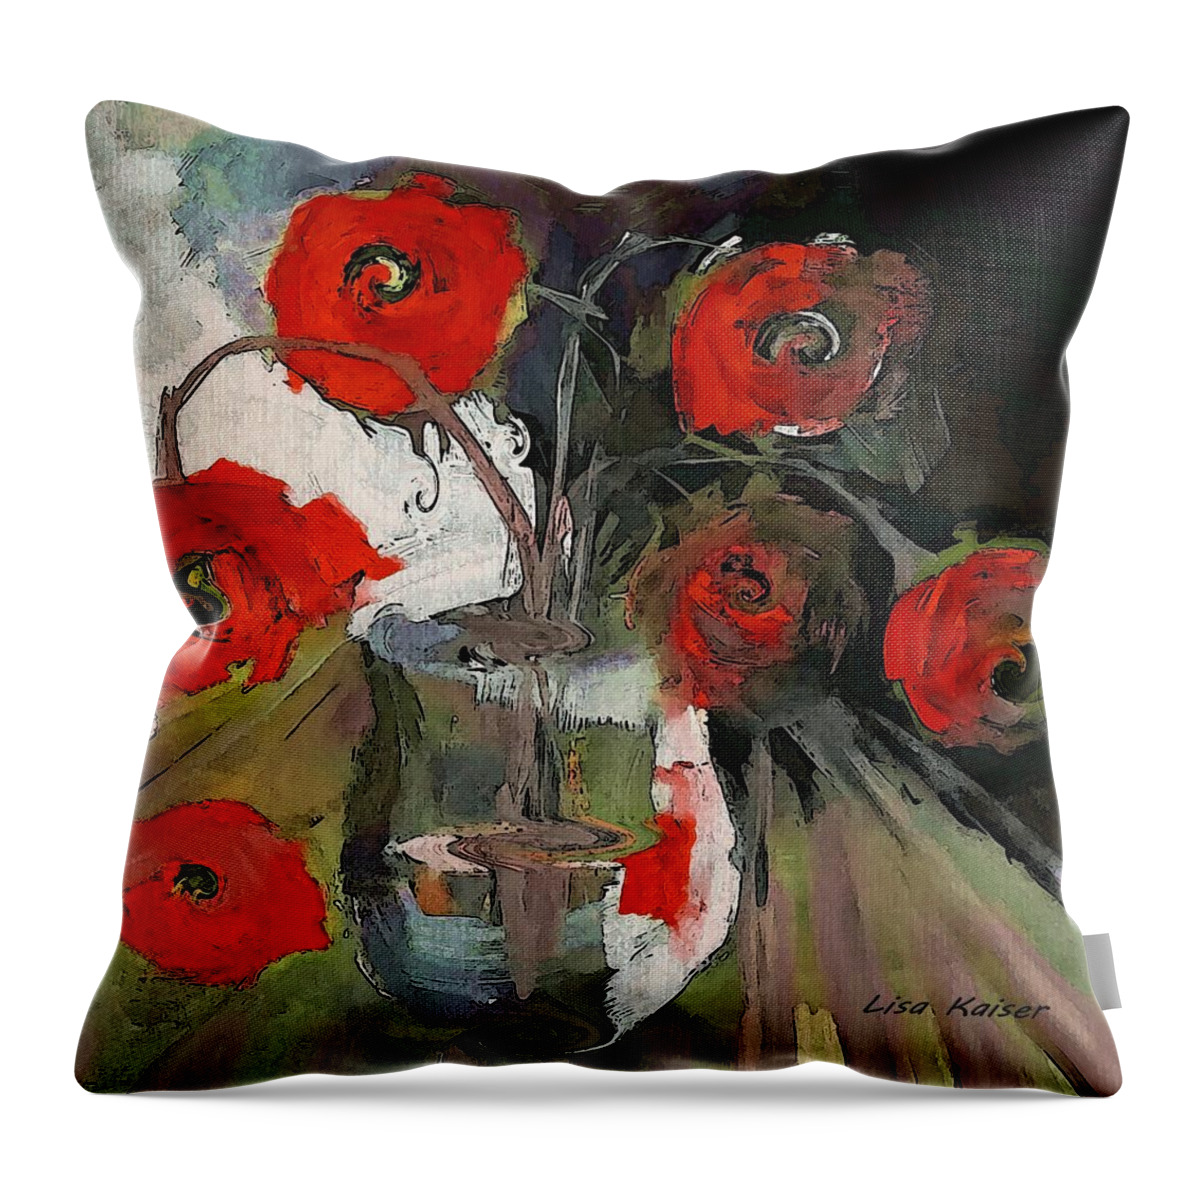 Red Throw Pillow featuring the painting Red Roses In A Vase by Lisa Kaiser